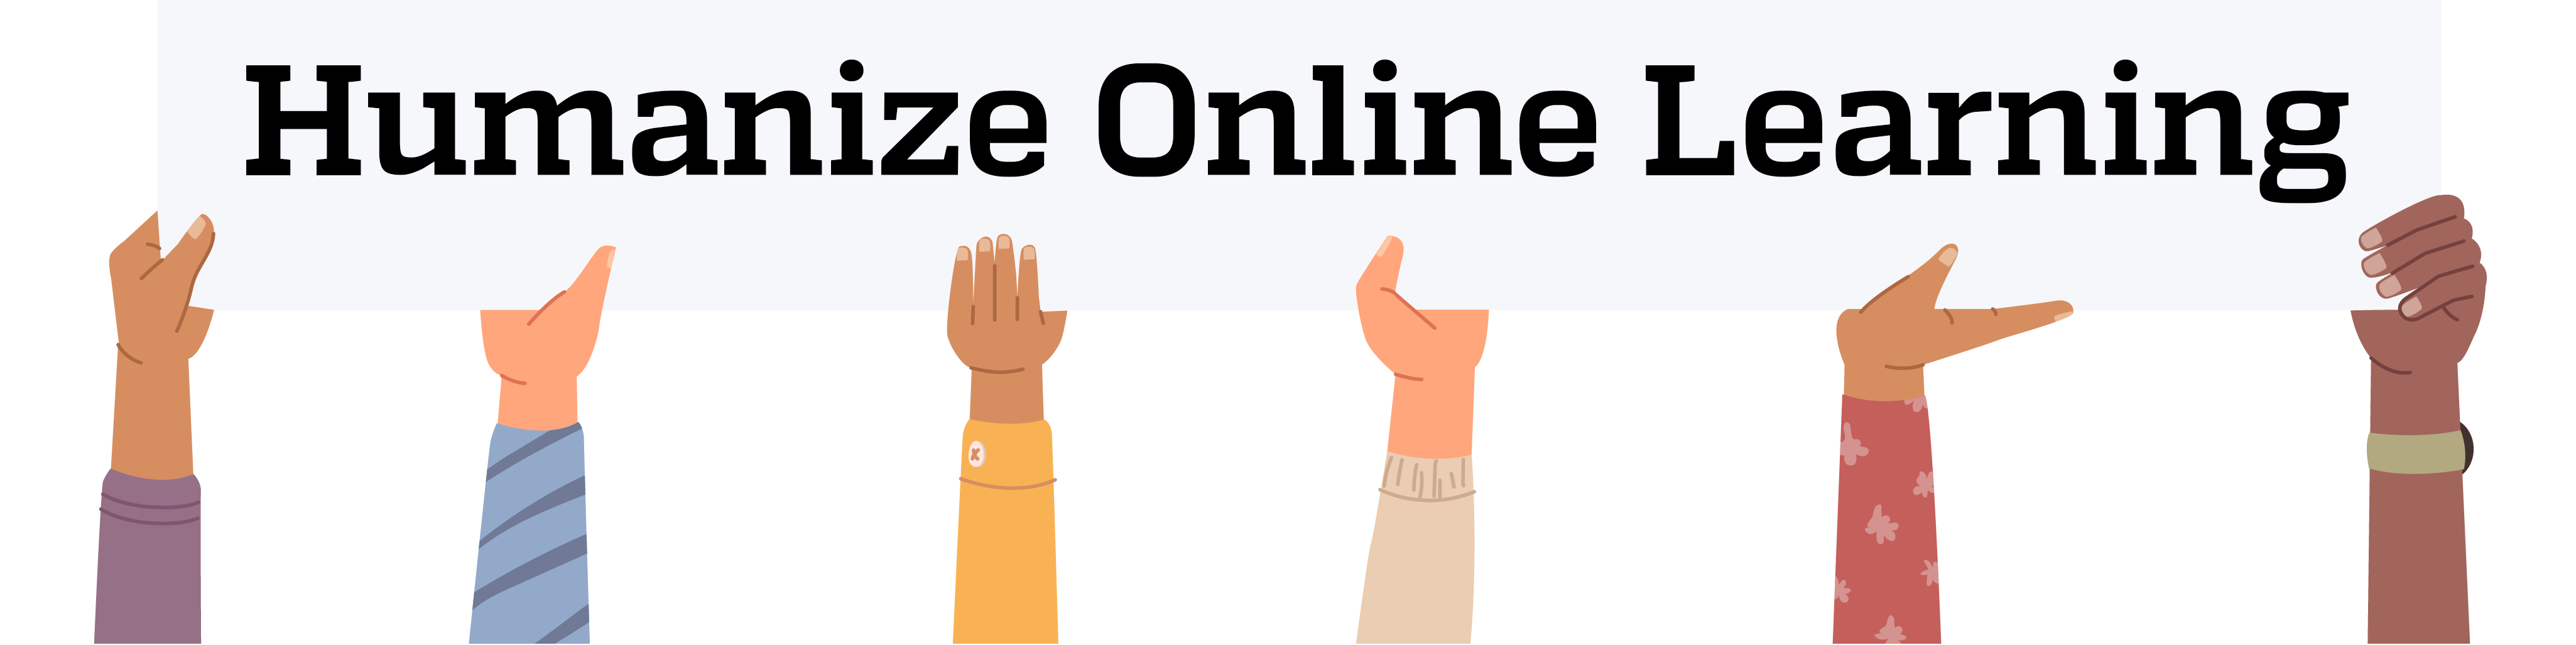 Hands holding Humanize Online Learning sign